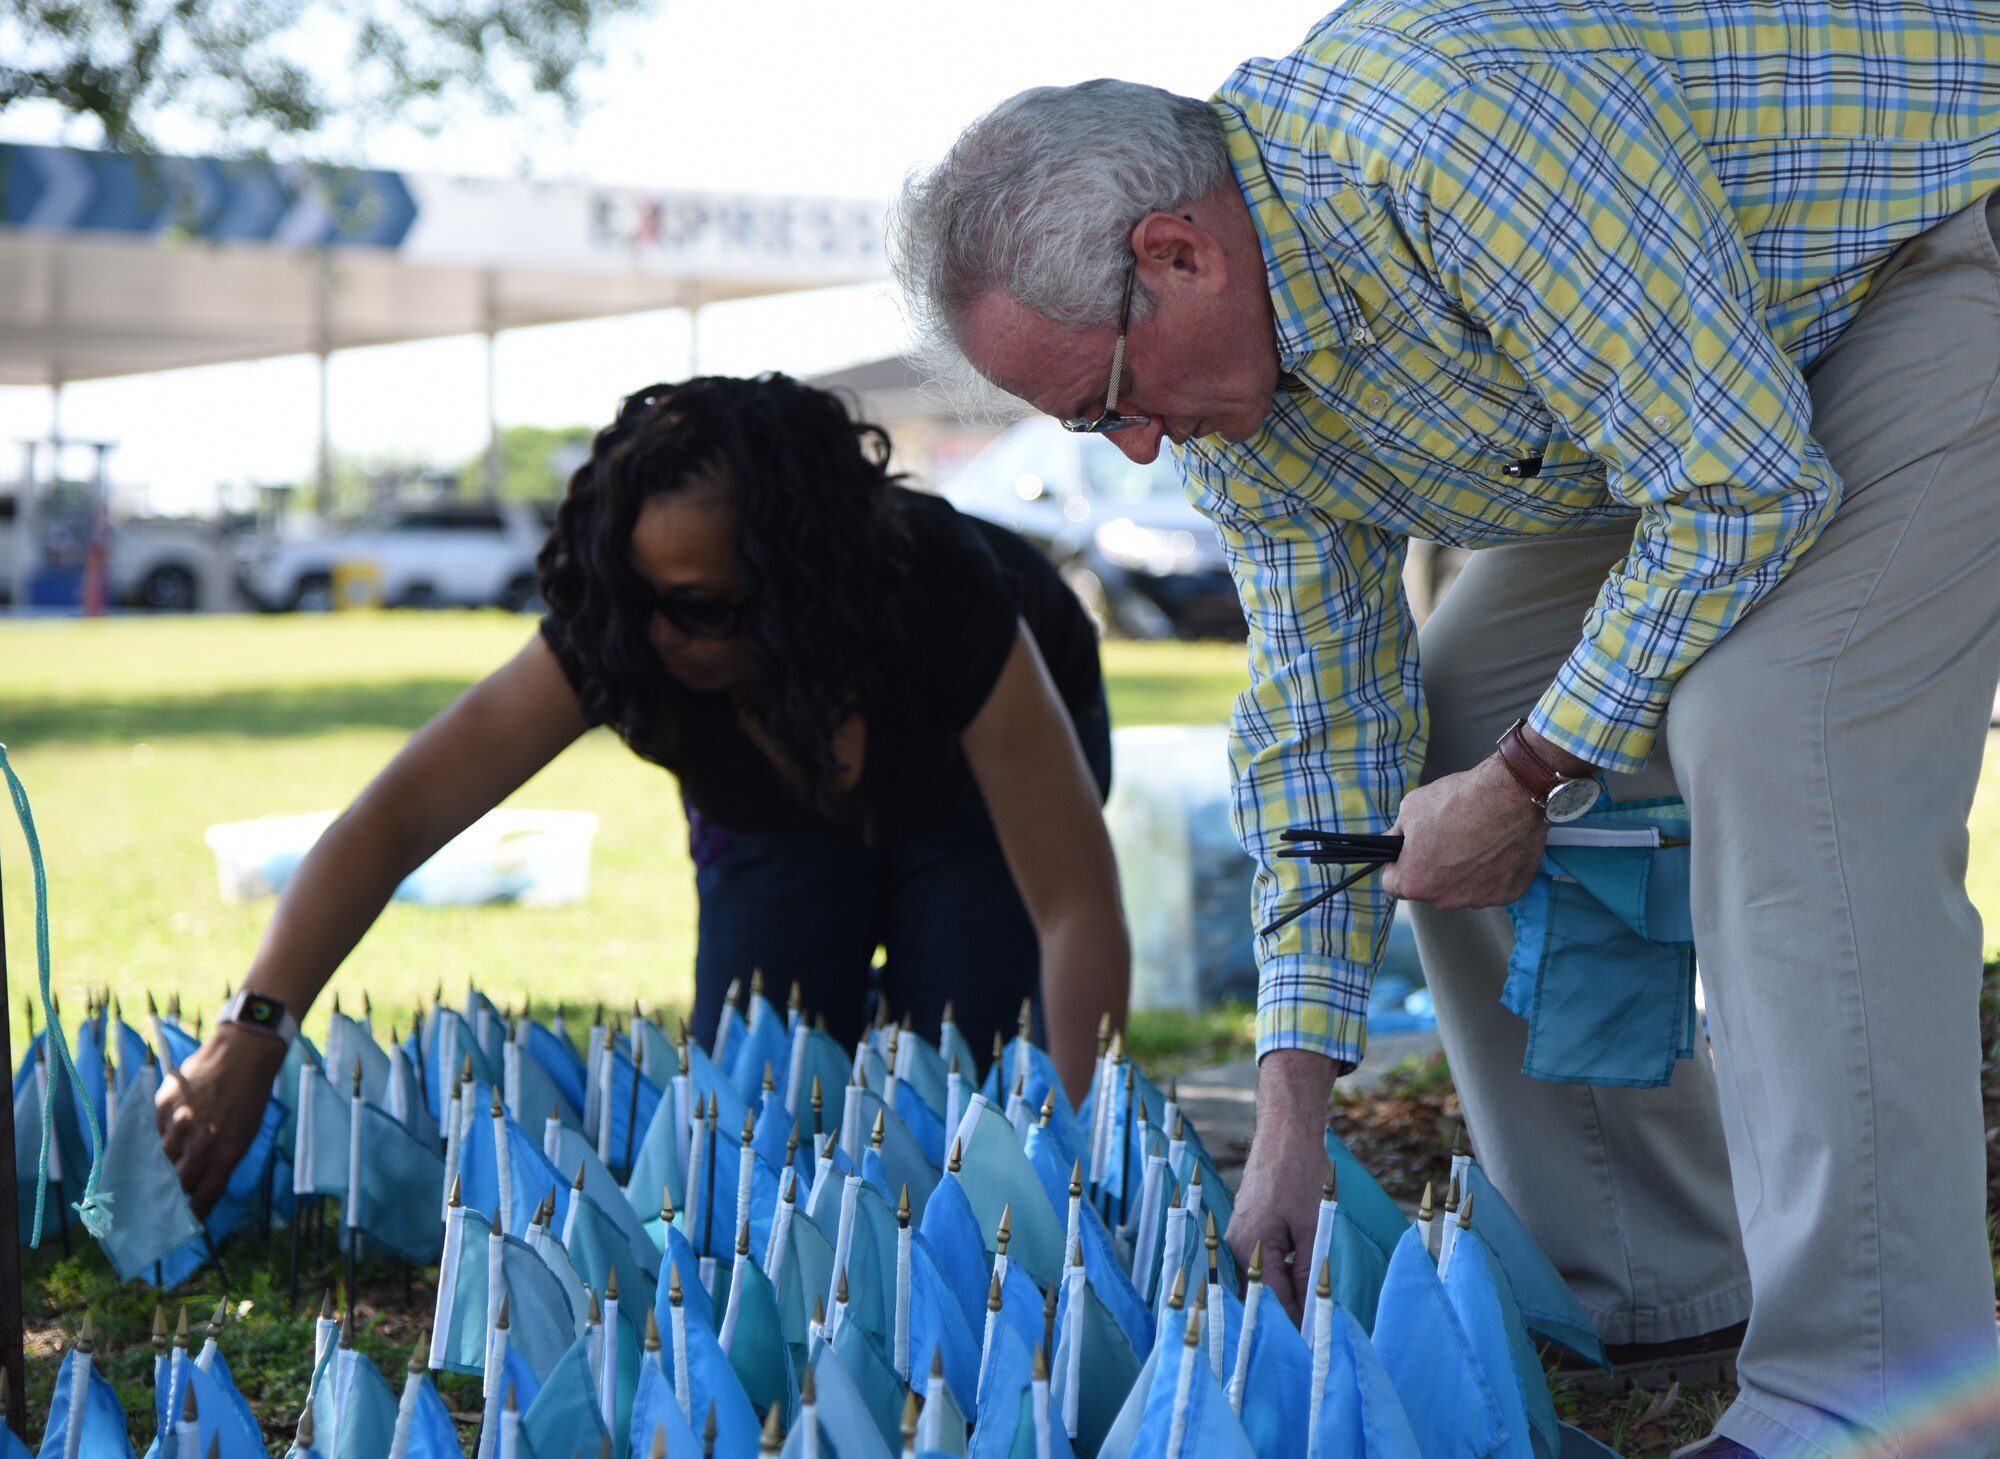 Barry Newman, 81st Training Wing sexual assault response coordinator, and Angie Woods, 81st TRW sexual assault prevention and response program specialist, place flags in the ground for Sexual Assault Awareness Month near the intersection of Larcher Blvd. and Meadows Dr. at Keesler Air Force Base, Mississippi, April 18, 2018. Each flag represents one Air Force member who reported being sexually assaulted in fiscal year 2015. The 1,312 flag display will be moved to several locations around the base throughout the month. (U.S. Air Force photo by Kemberly Groue)